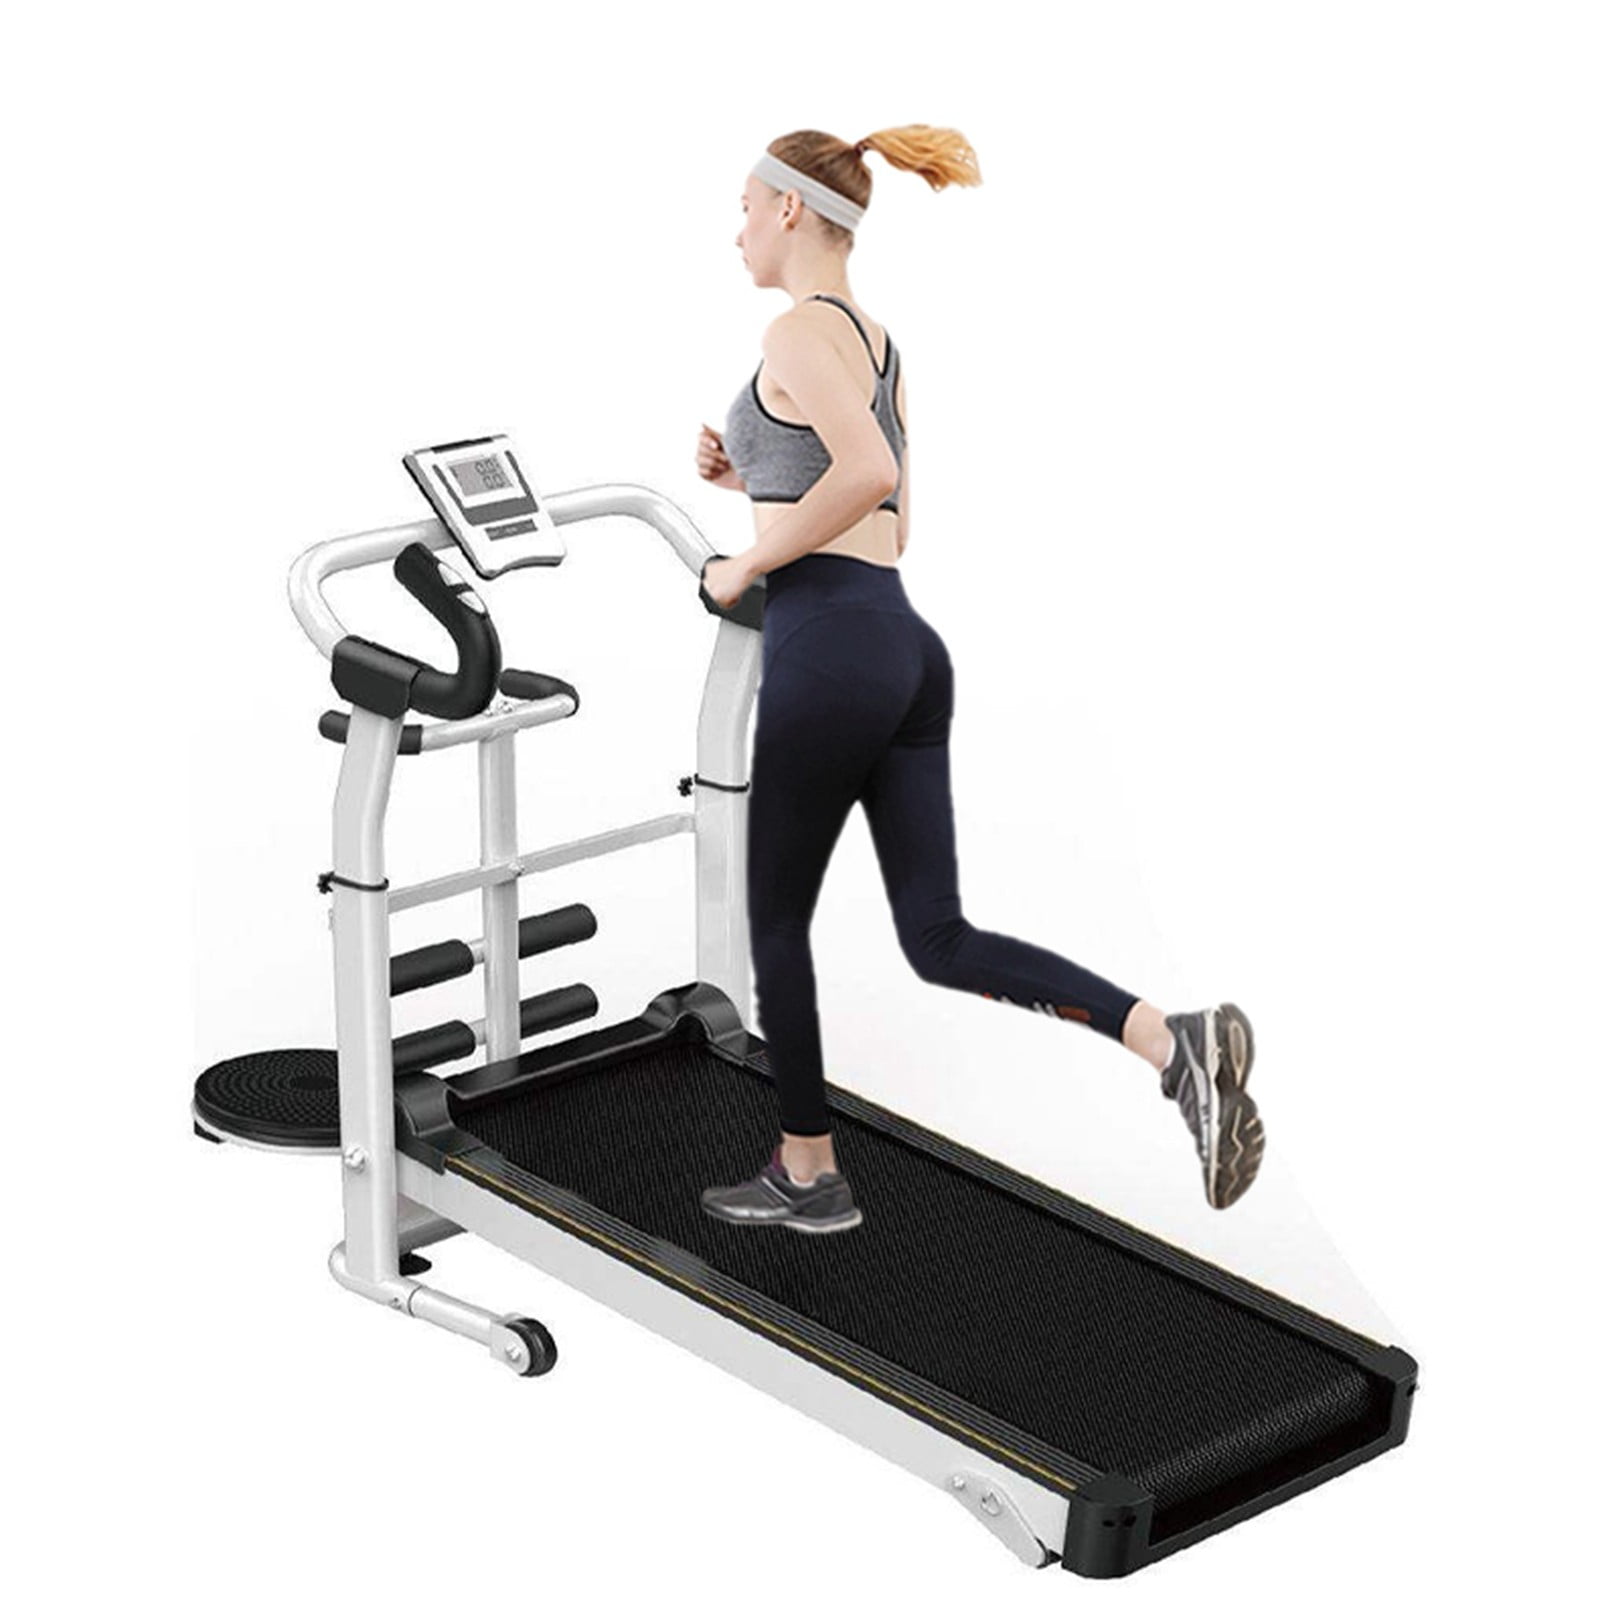 Details about   Fitness Stepper Treadmill Cardio Steppers Machine Equipment Exercise Mini Bike 